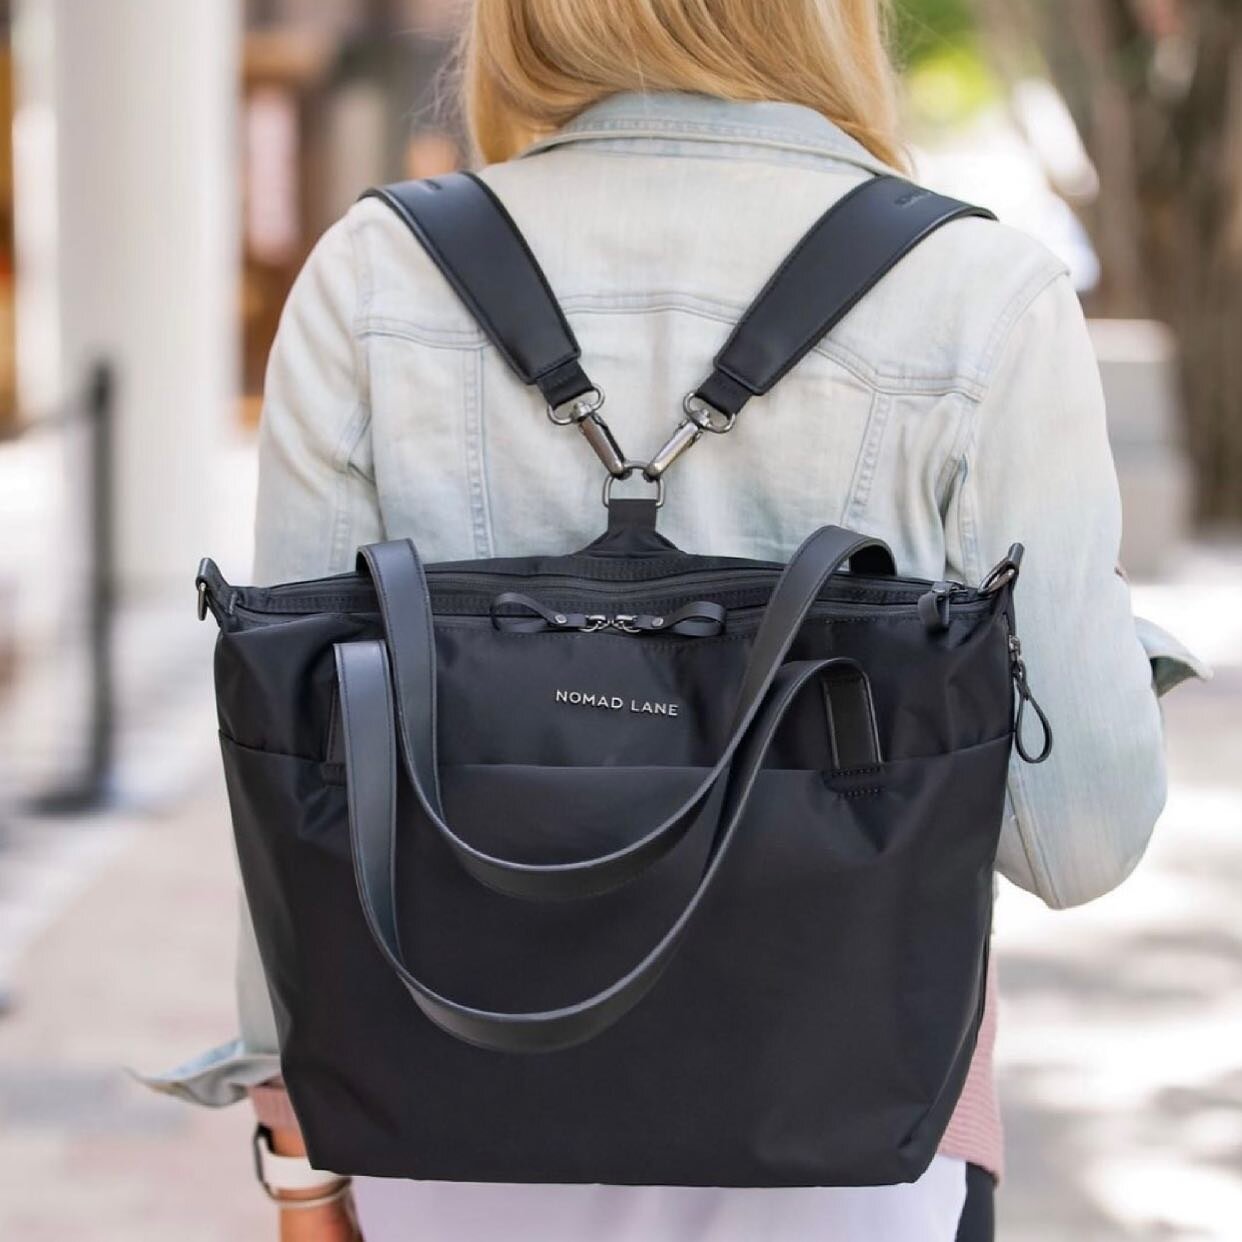 Ready to get out and about and jet set again ✈️? Introducing the elegant Oragami Tote now live on Indiegogo by our friends at Nomad Lane! It&rsquo;s packed with intuitive organizational pockets and triples as a backpack and crossbody bag. Link in our